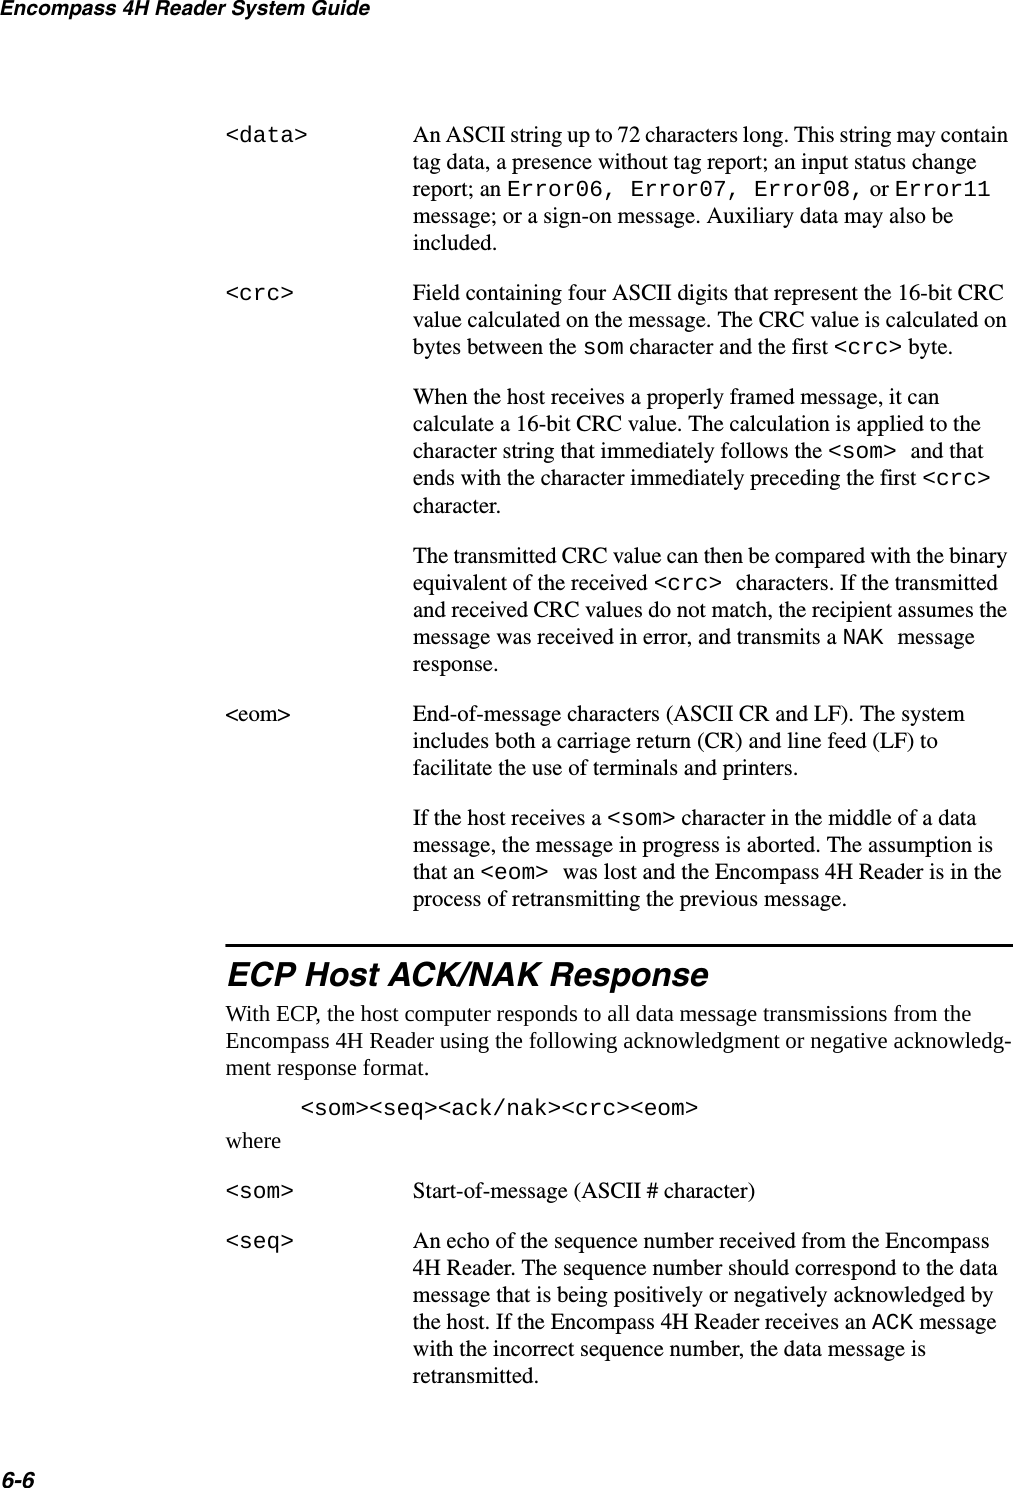 Encompass 4H Reader System Guide6-6&lt;data&gt; An ASCII string up to 72 characters long. This string may contain tag data, a presence without tag report; an input status change report; an Error06, Error07, Error08, or Error11 message; or a sign-on message. Auxiliary data may also be included.&lt;crc&gt; Field containing four ASCII digits that represent the 16-bit CRC value calculated on the message. The CRC value is calculated on bytes between the som character and the first &lt;crc&gt; byte.When the host receives a properly framed message, it can calculate a 16-bit CRC value. The calculation is applied to the character string that immediately follows the &lt;som&gt; and that ends with the character immediately preceding the first &lt;crc&gt; character.The transmitted CRC value can then be compared with the binary equivalent of the received &lt;crc&gt; characters. If the transmitted and received CRC values do not match, the recipient assumes the message was received in error, and transmits a NAK message response.&lt;eom&gt; End-of-message characters (ASCII CR and LF). The system includes both a carriage return (CR) and line feed (LF) to facilitate the use of terminals and printers.If the host receives a &lt;som&gt; character in the middle of a data message, the message in progress is aborted. The assumption is that an &lt;eom&gt; was lost and the Encompass 4H Reader is in the process of retransmitting the previous message.ECP Host ACK/NAK ResponseWith ECP, the host computer responds to all data message transmissions from the Encompass 4H Reader using the following acknowledgment or negative acknowledg-ment response format.&lt;som&gt;&lt;seq&gt;&lt;ack/nak&gt;&lt;crc&gt;&lt;eom&gt;where&lt;som&gt; Start-of-message (ASCII # character)&lt;seq&gt; An echo of the sequence number received from the Encompass 4H Reader. The sequence number should correspond to the data message that is being positively or negatively acknowledged by the host. If the Encompass 4H Reader receives an ACK message with the incorrect sequence number, the data message is retransmitted.